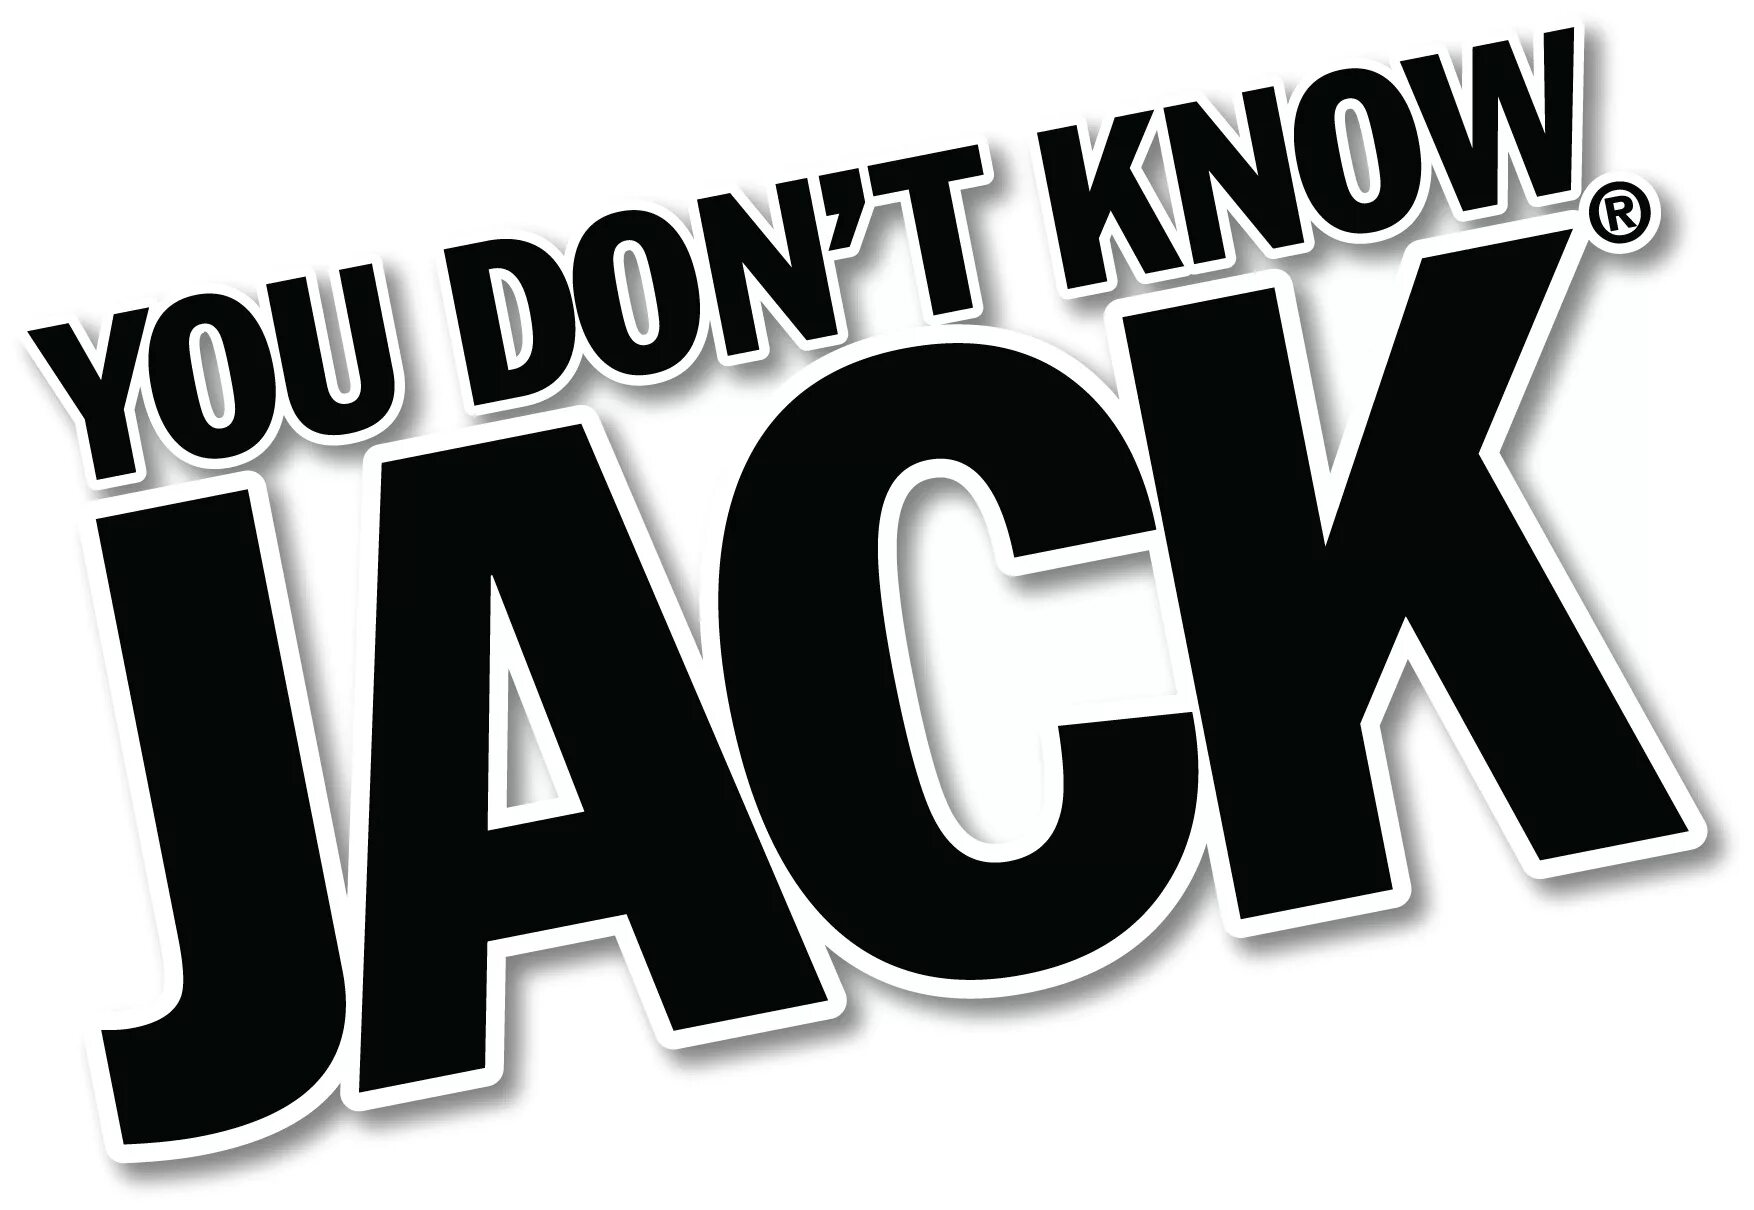 Owners don t know. Don t. Know картинка. You don't Jack. You don't know Jack: Facebook.